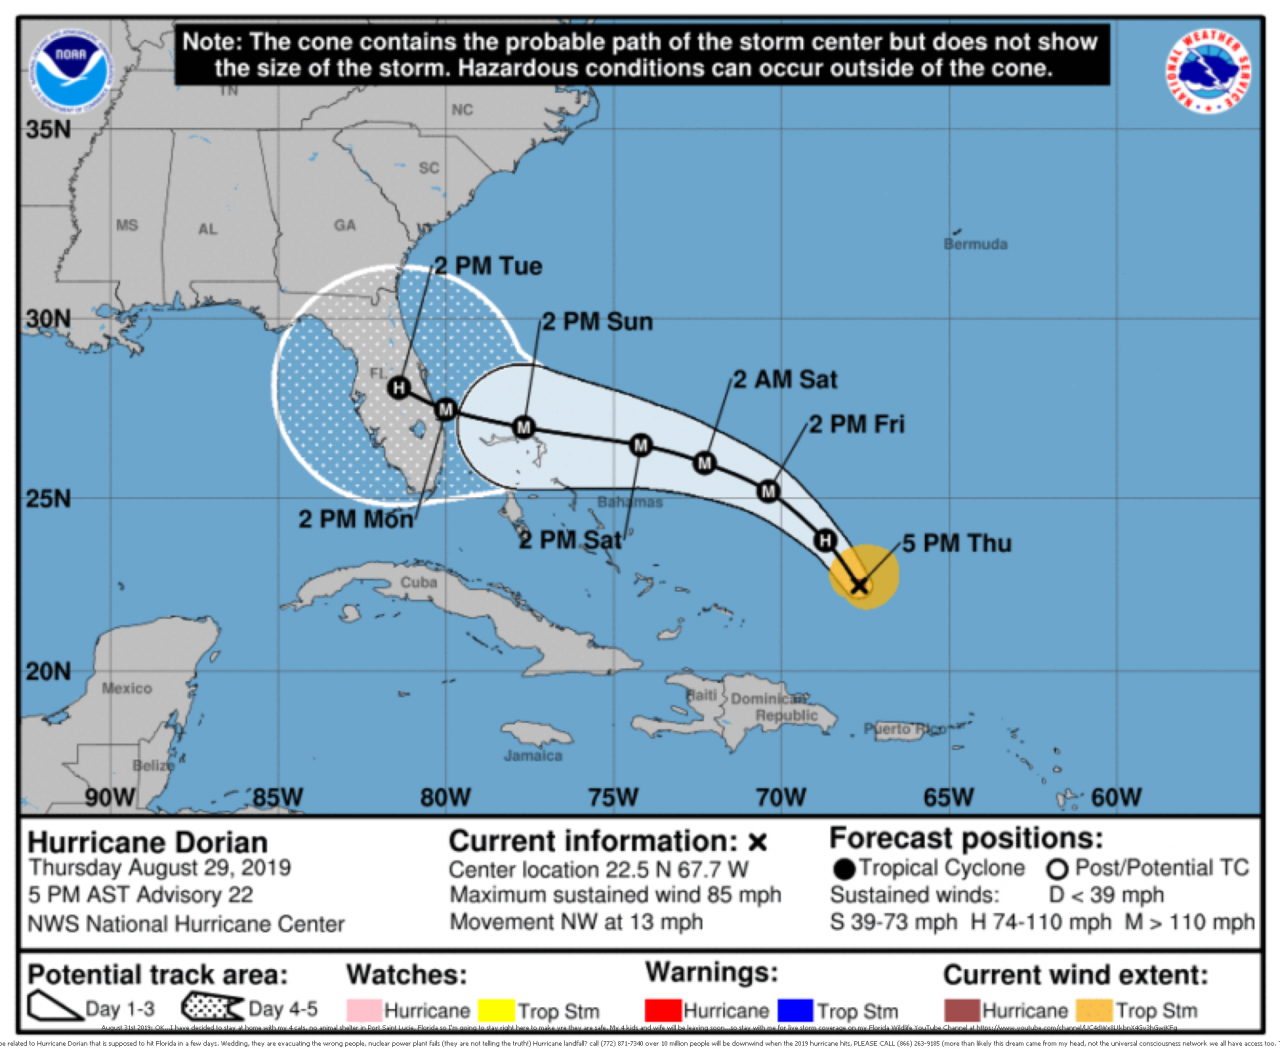 Hurricane Dorian Aug 2019 prediction by Psychic Brian Ladd 204603 5day cone with line and wind-800x656
Hurricane Dorian Aug 2019 prediction by Psychic Brian Ladd 204603 5day cone with line and wind-800x656
